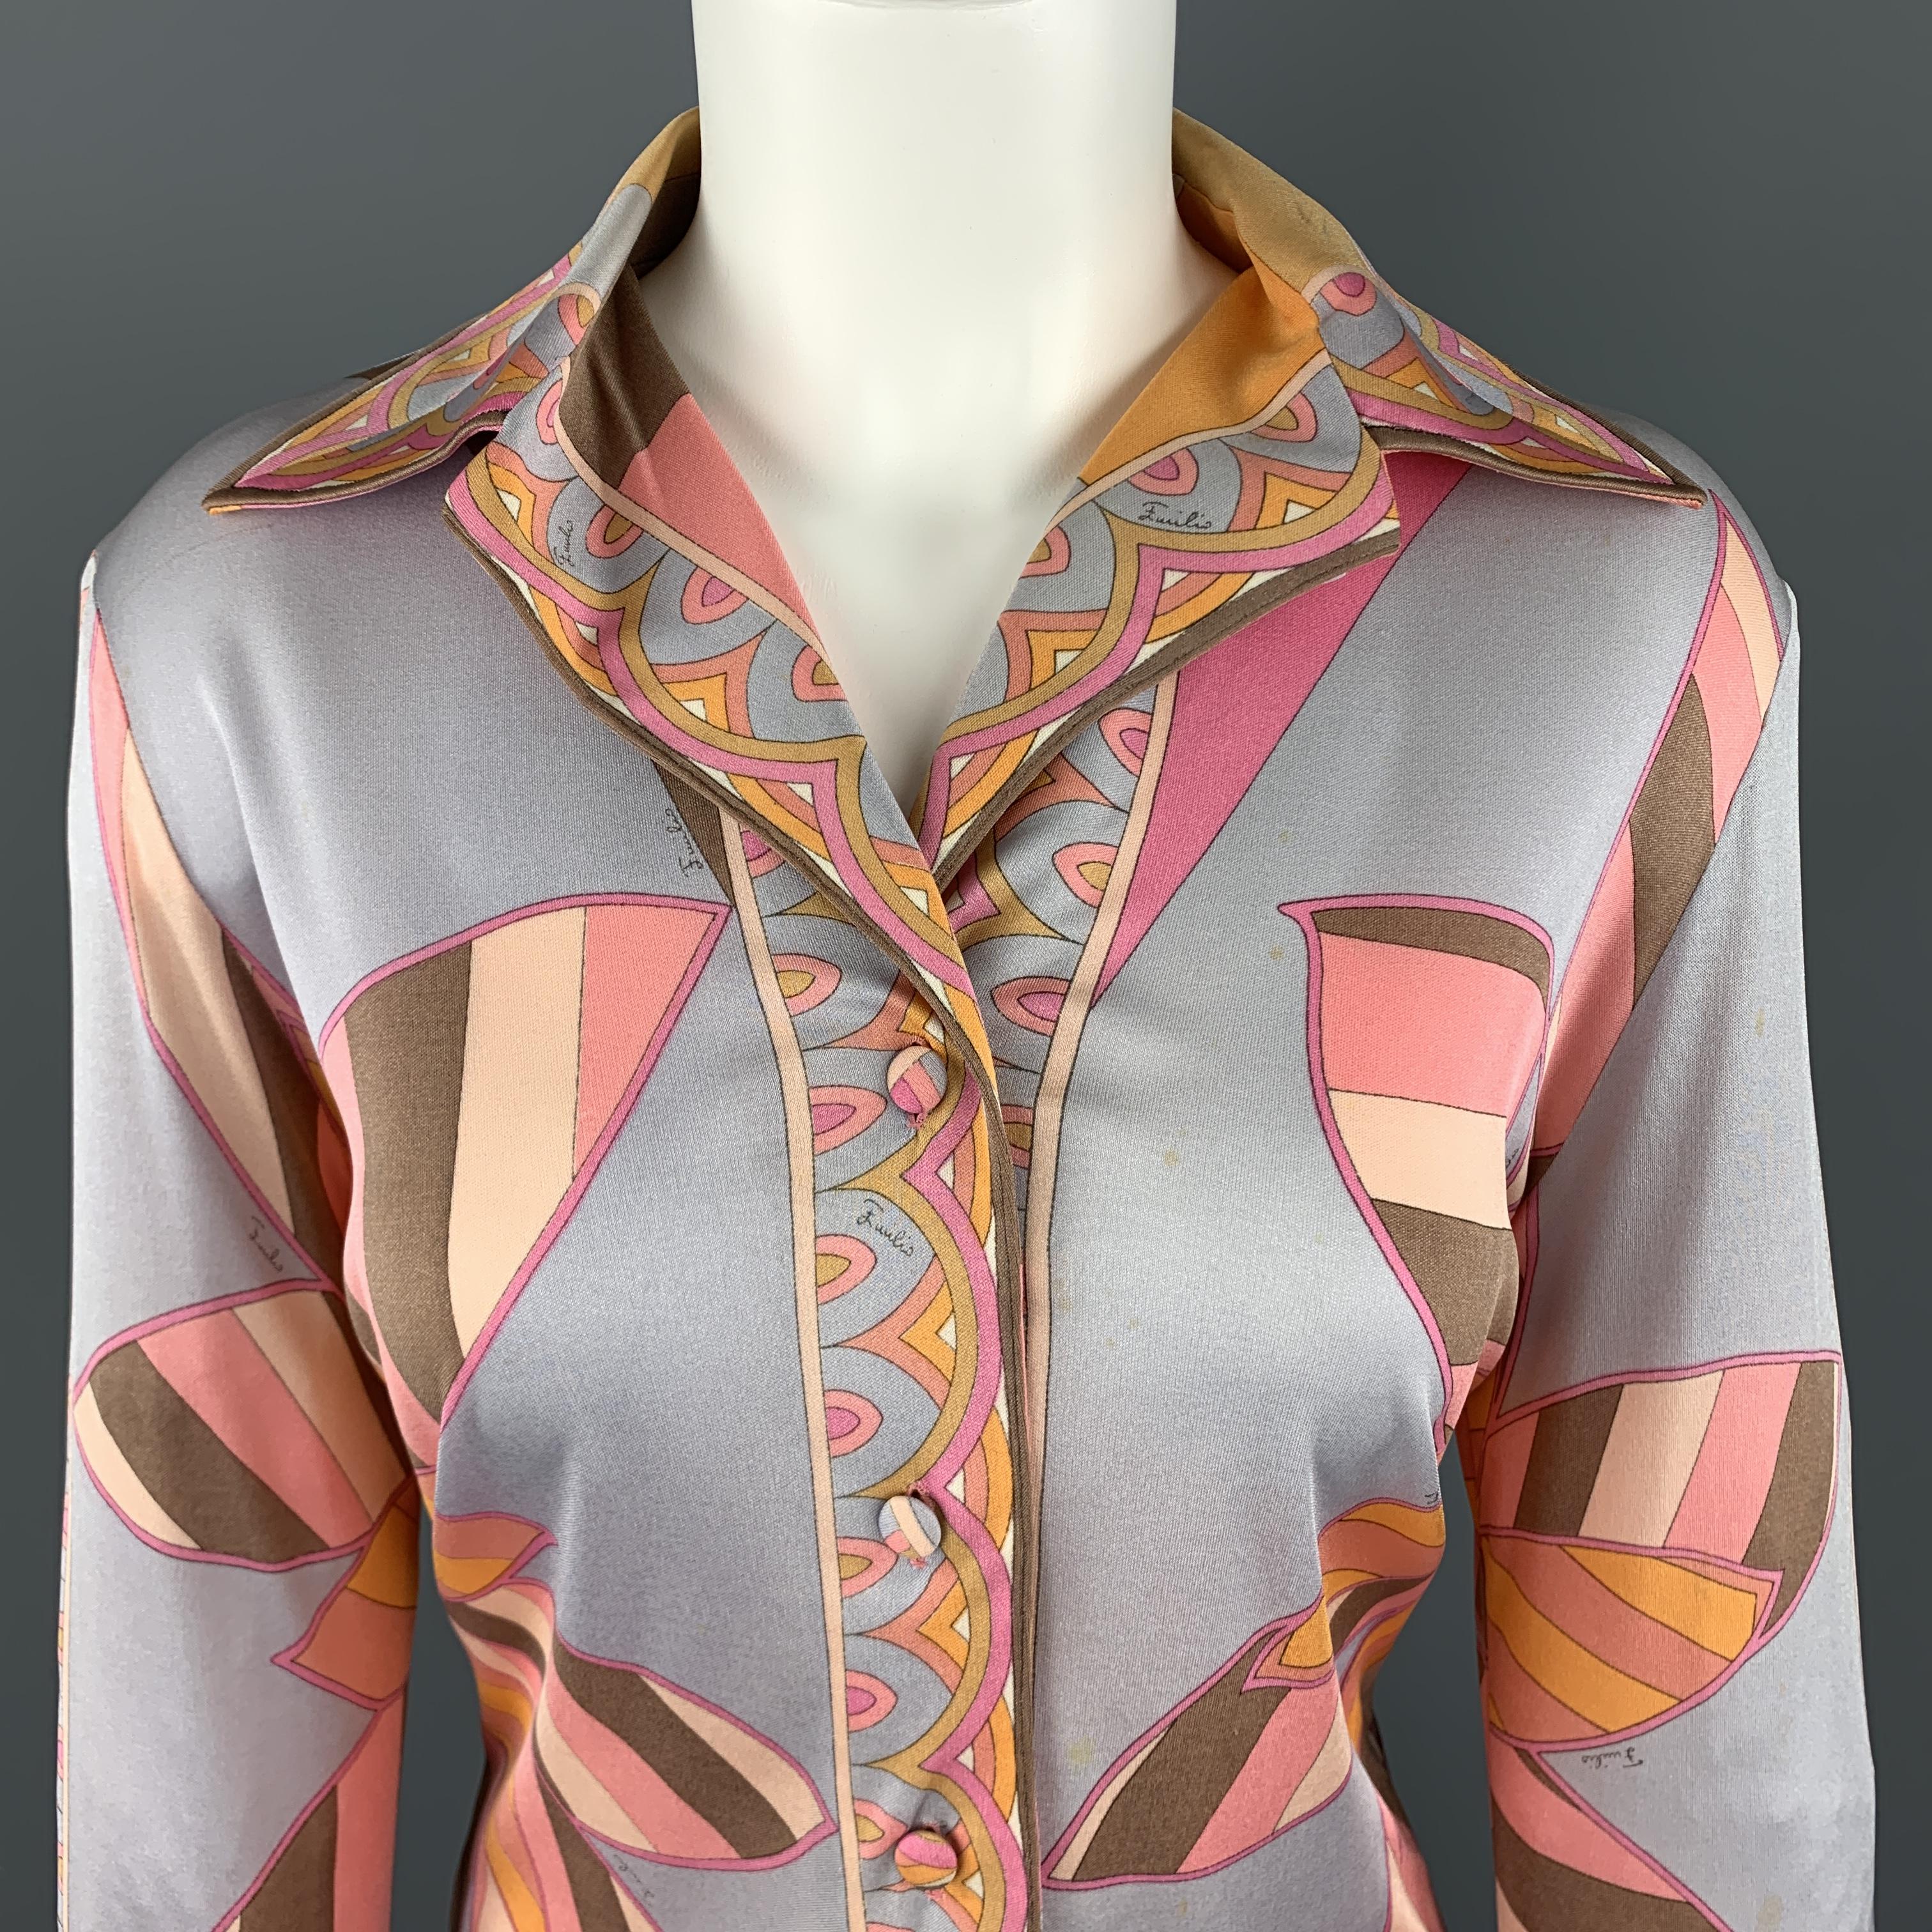 Vintage EMILIO PUCCI blouse comes in a silk blend jersey with an all over pink and gray floral print and spread collar. Wa=ear and spots throughout. As-is. ade in Italy.

Fair Pre-Owned Condition.
Marked: 10

Measurements:

Shoulder: 17 in.
Bust: 40